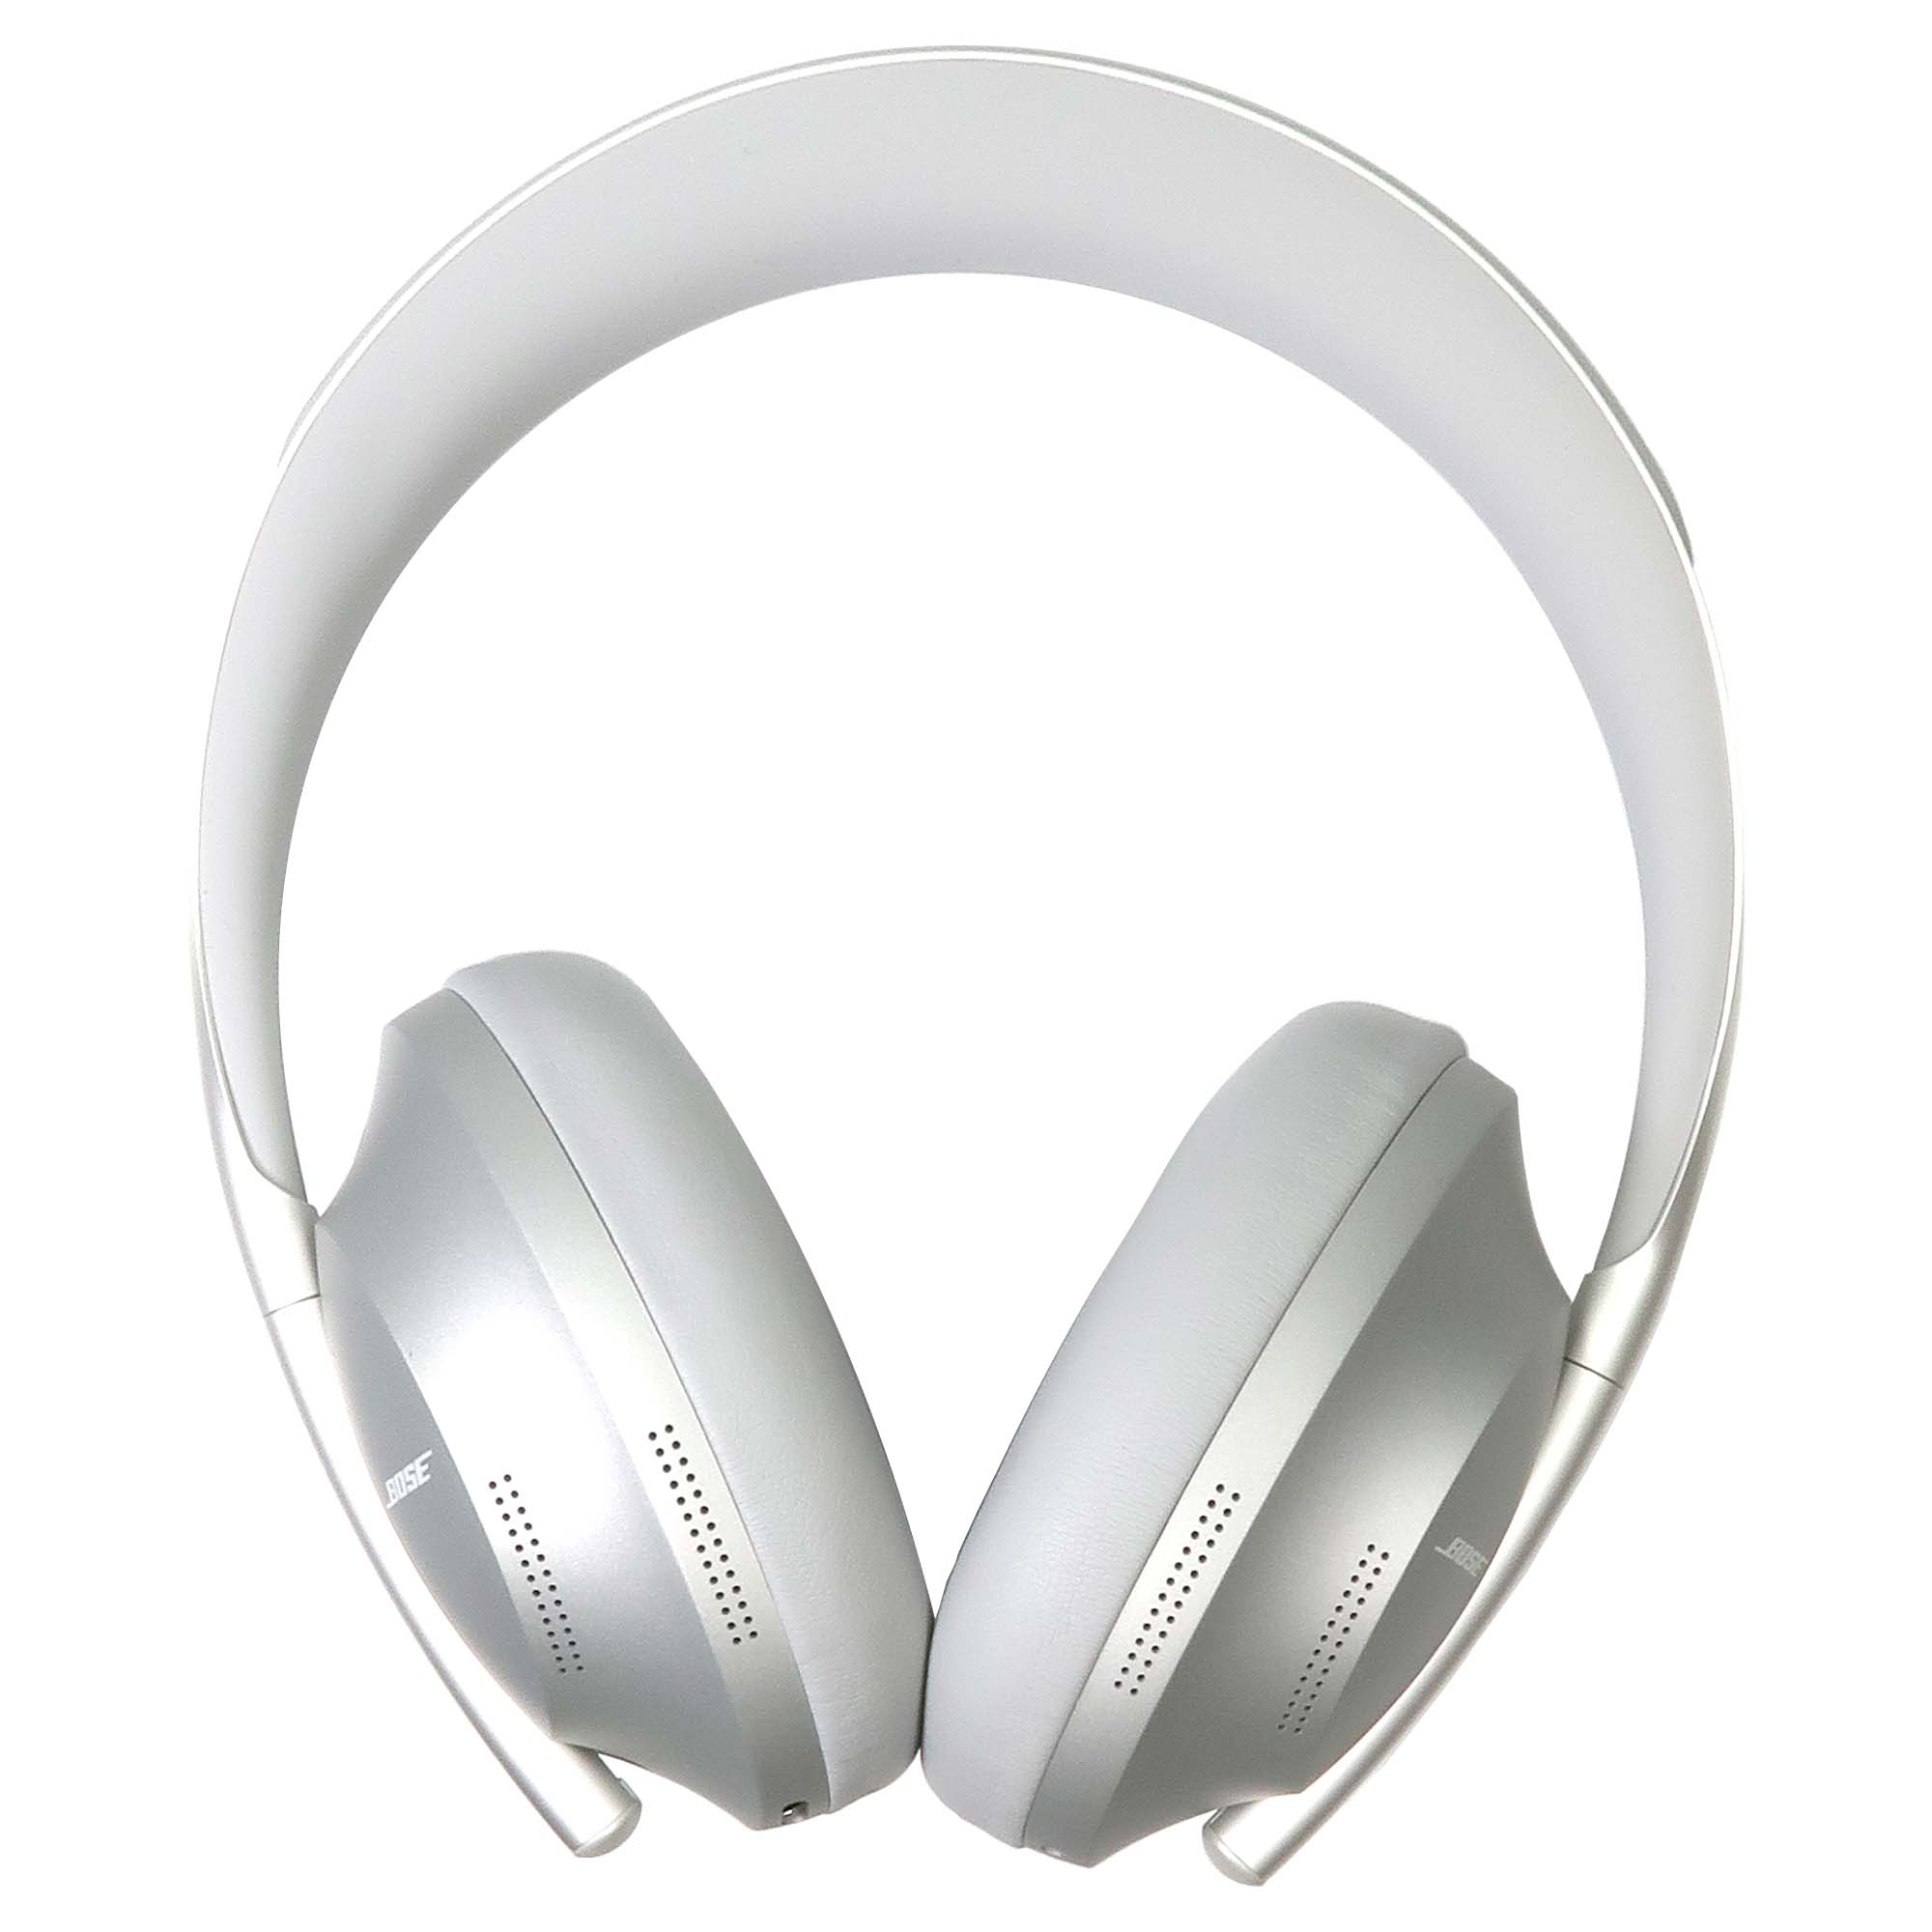 Bose Noise-Canceling 700 Bluetooth (Silver) – The Teds Store